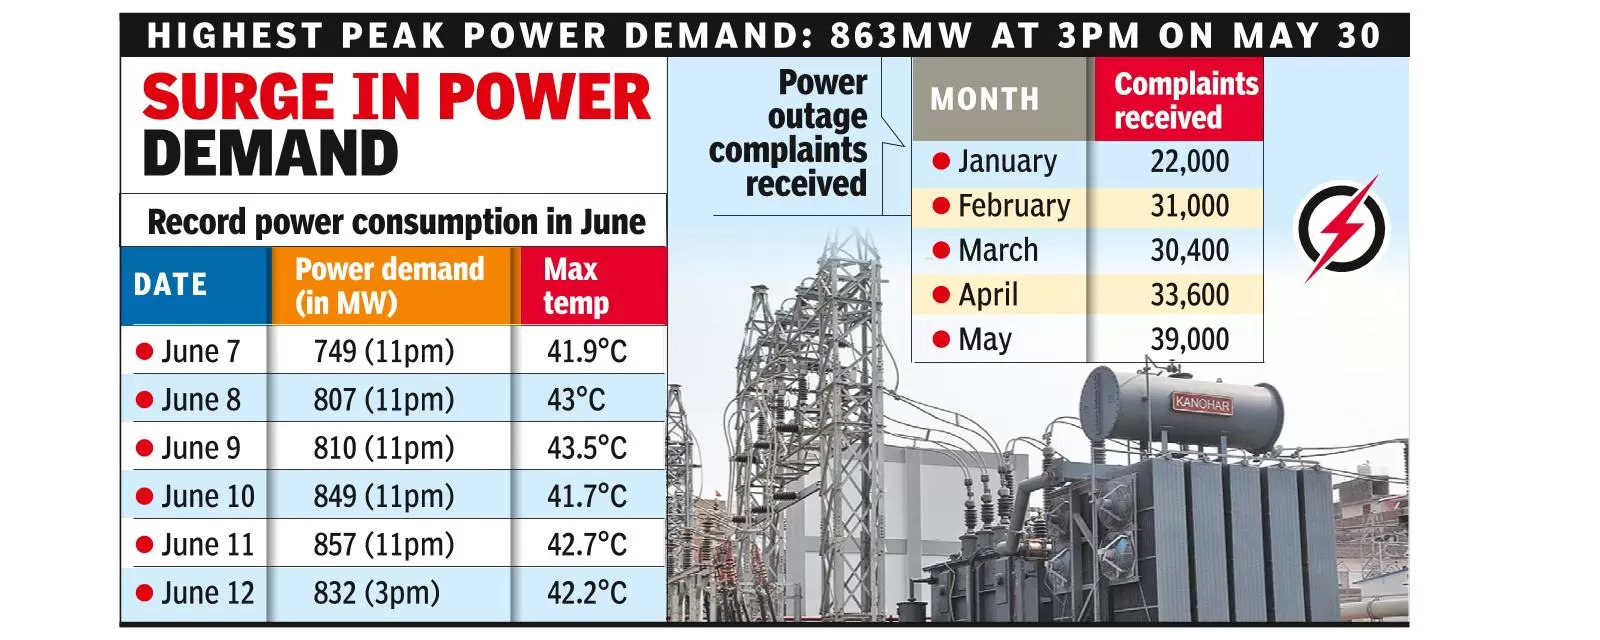 Power outages worsen woes of residents